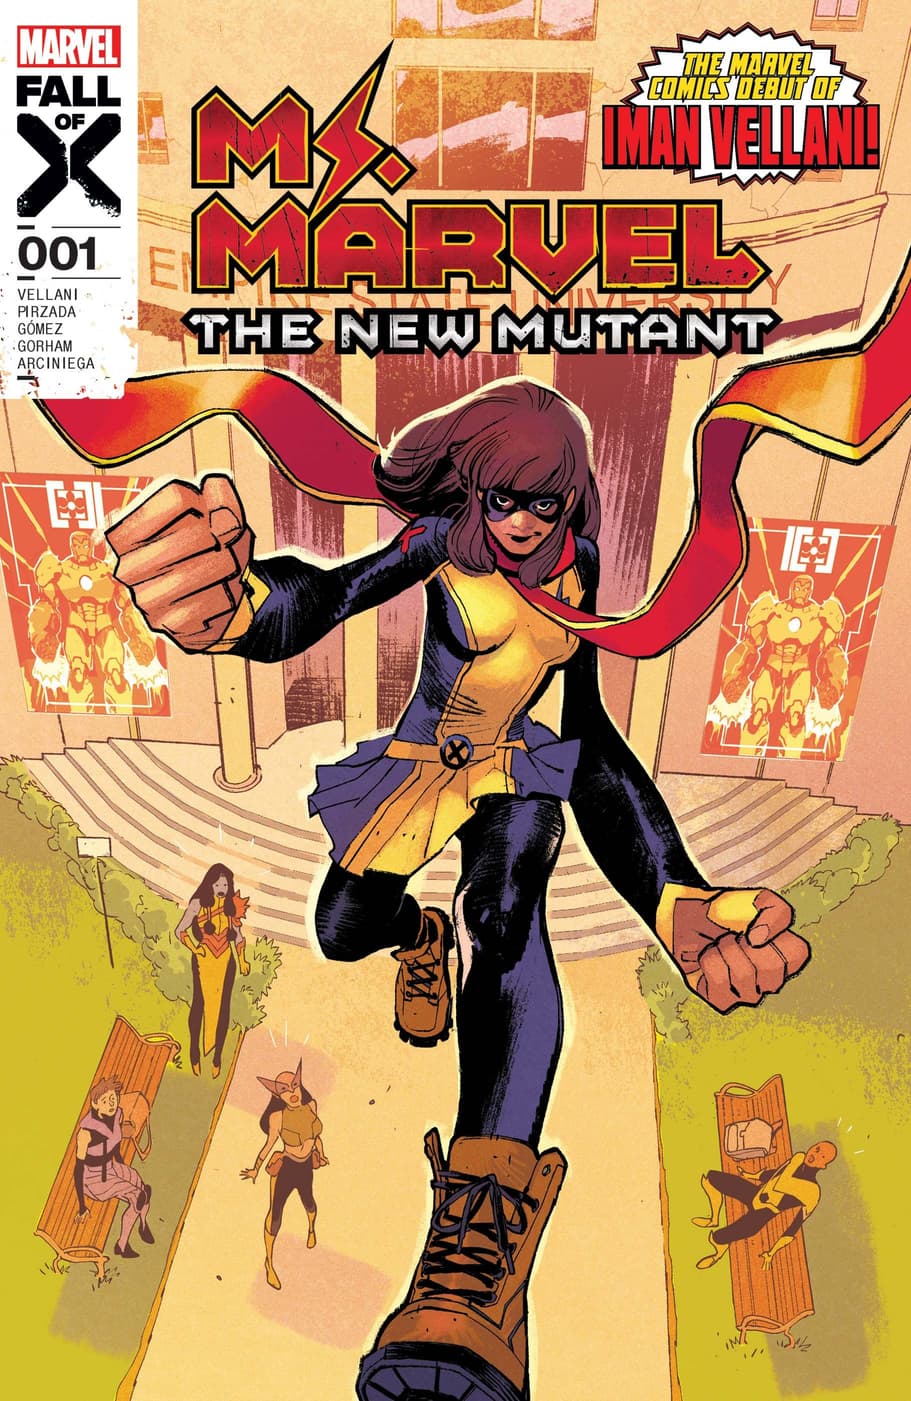 MS. MARVEL: THE NEW MUTANT (2023) #1 cover by Sara Pichelli